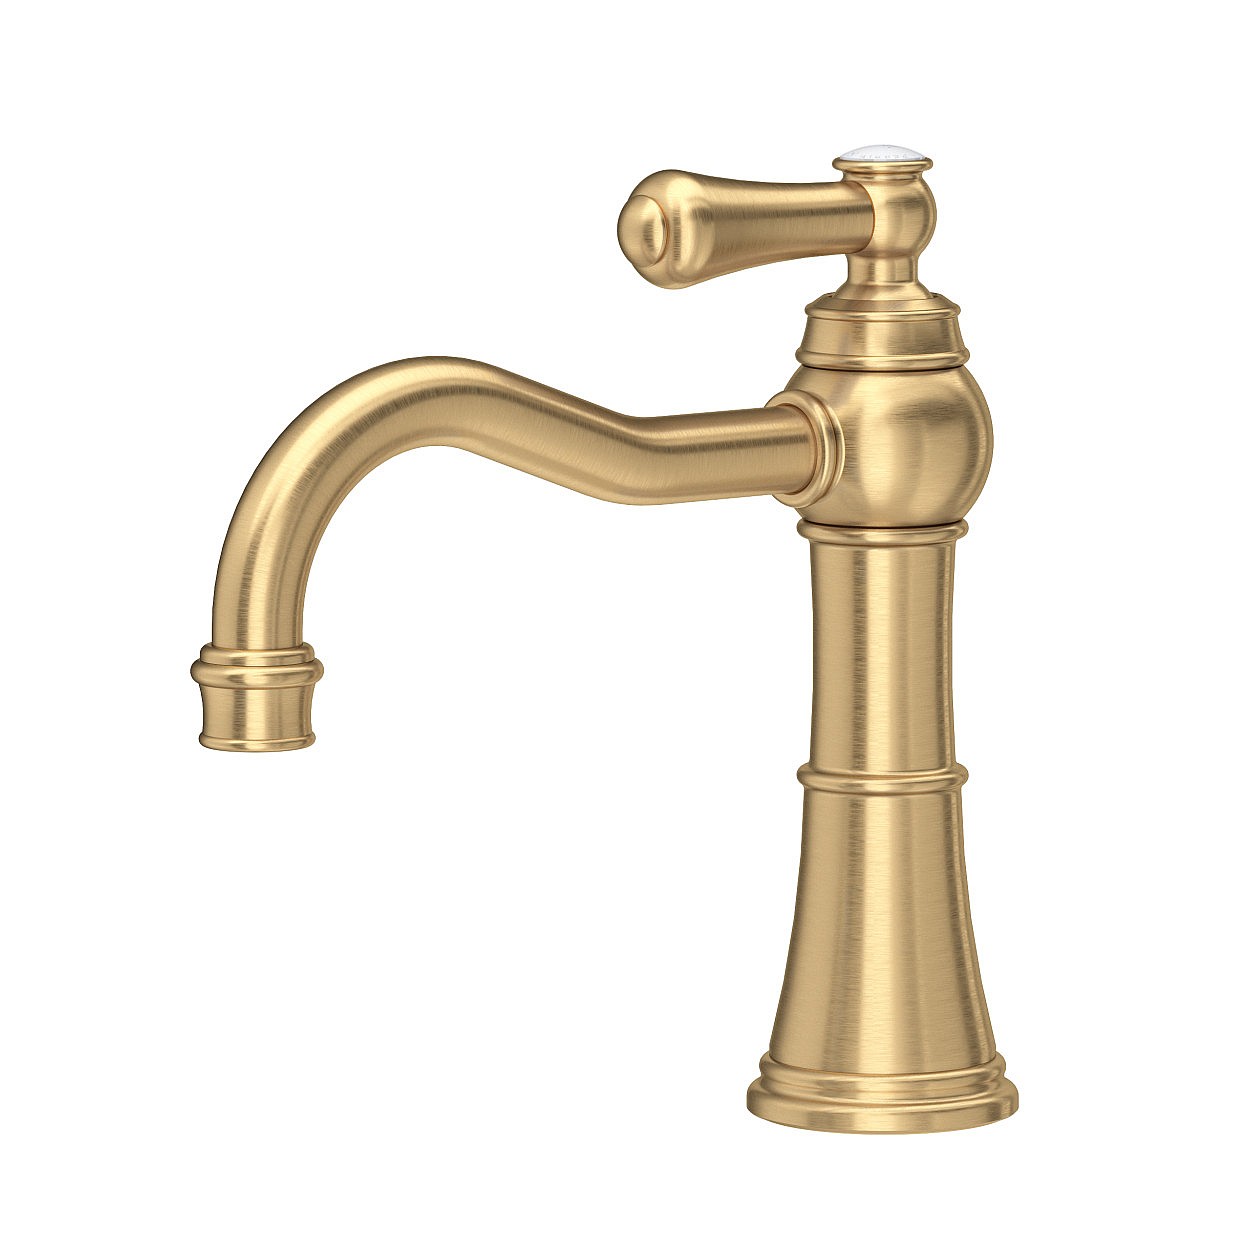 Georgian single lever basin mixer by Perrin & Rowe at House of Rohl